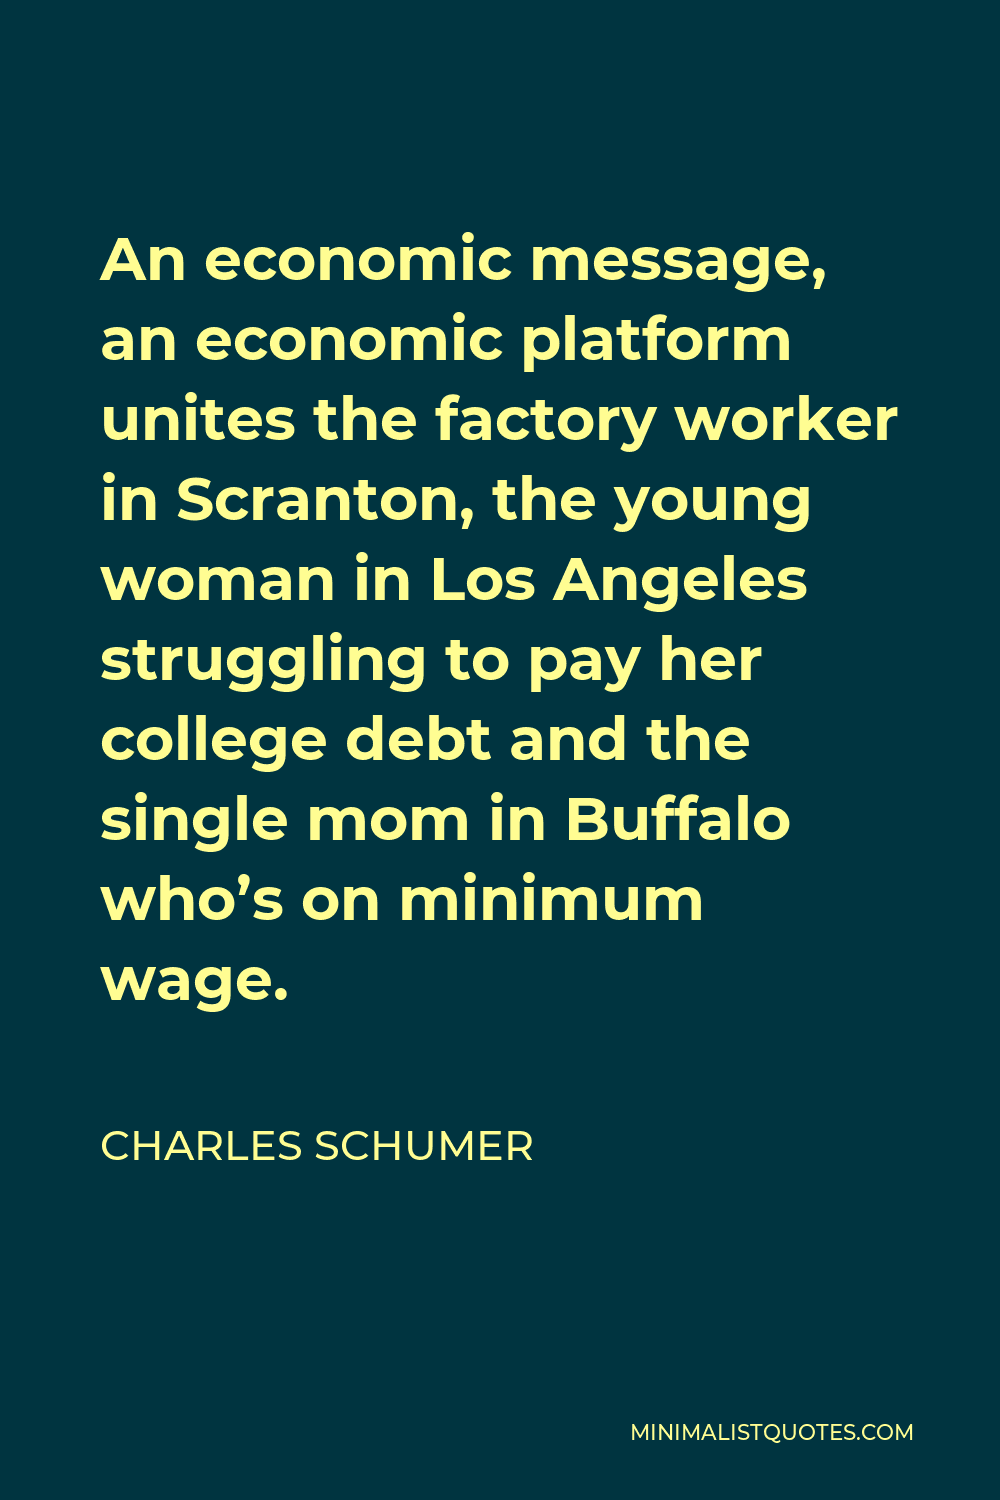 Charles Schumer Quote - An economic message, an economic platform unites the factory worker in Scranton, the young woman in Los Angeles struggling to pay her college debt and the single mom in Buffalo who’s on minimum wage.